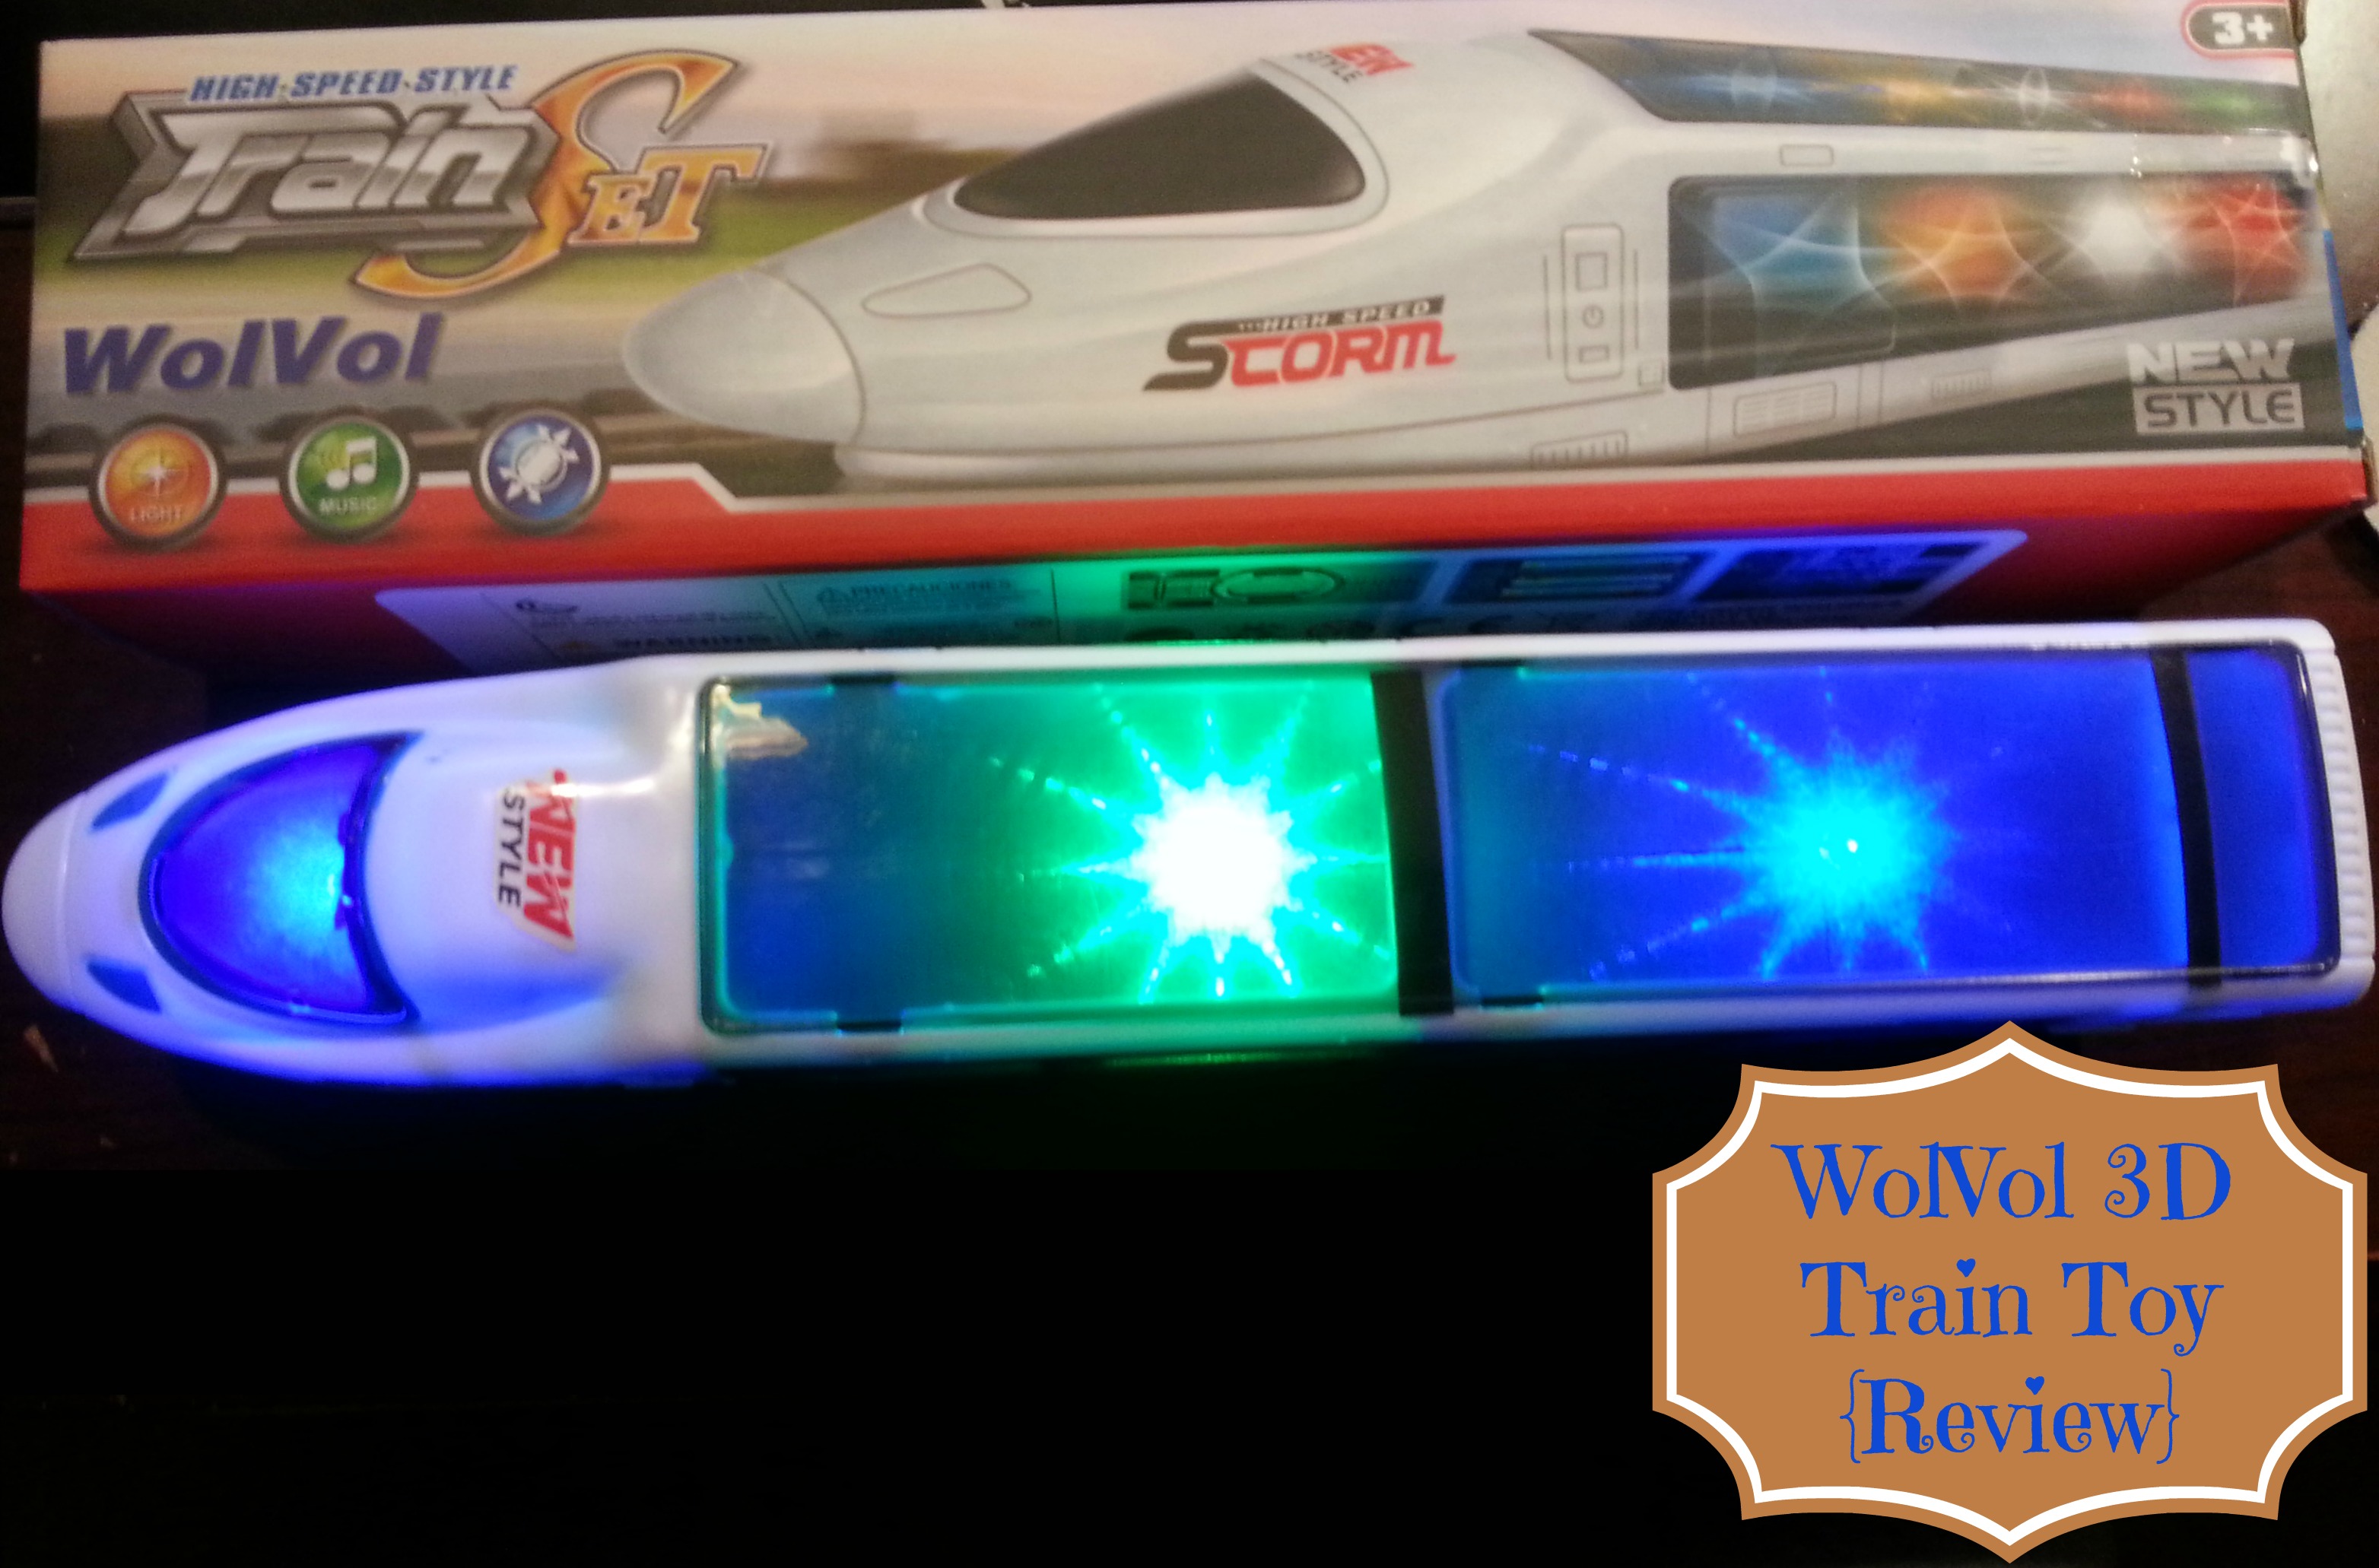 WolVol 3D Train Toy {Review}